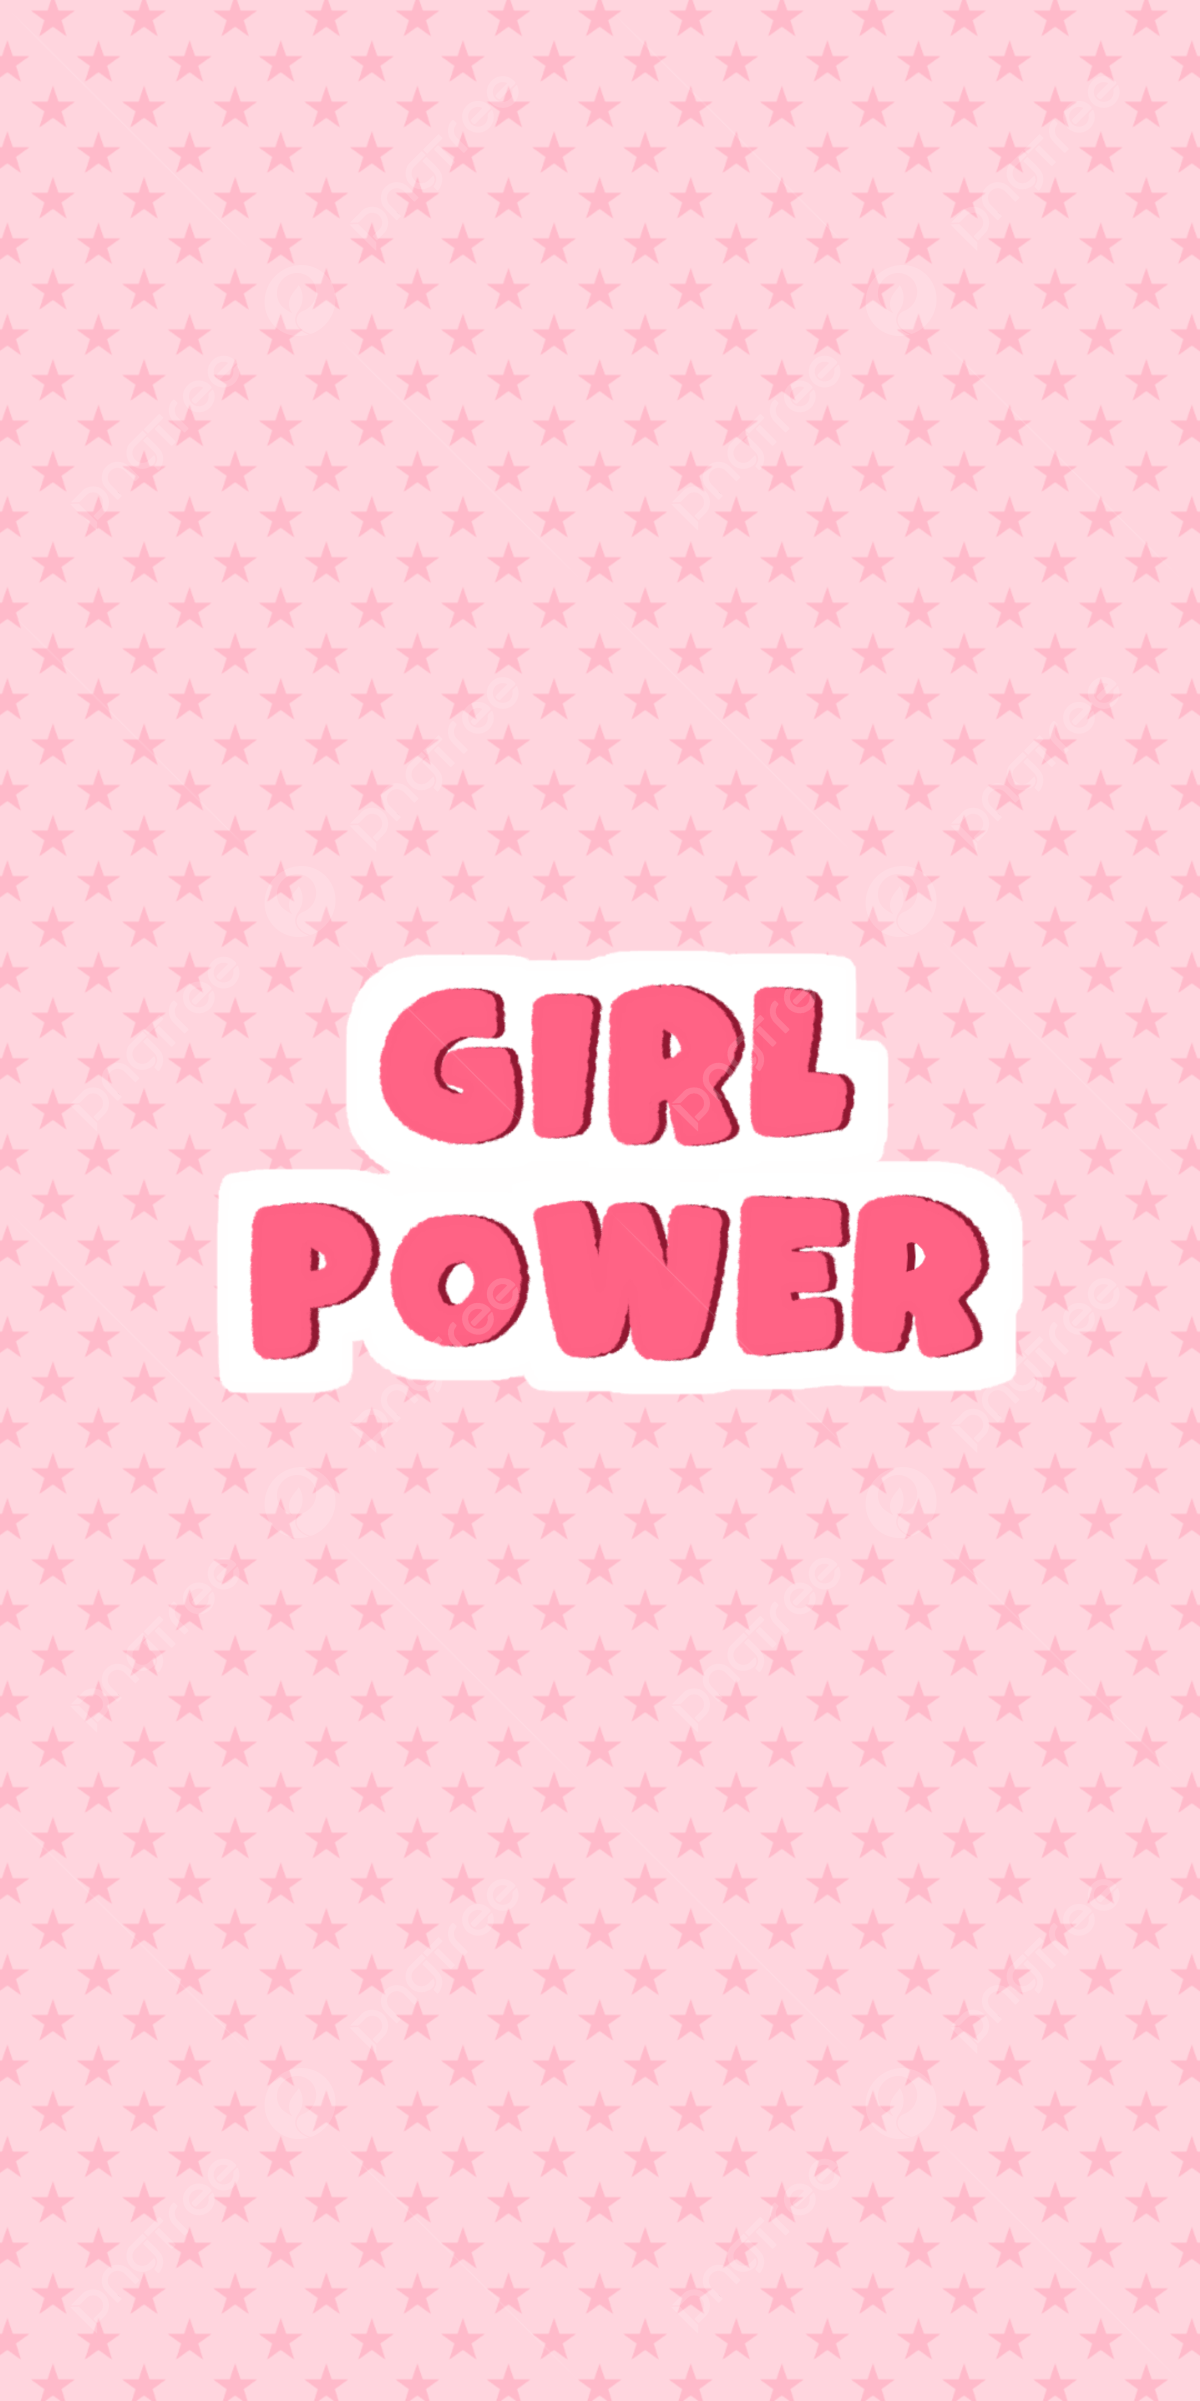 Cute pink wallpaper phone girl power background wallpaper image for free download - Cute pink